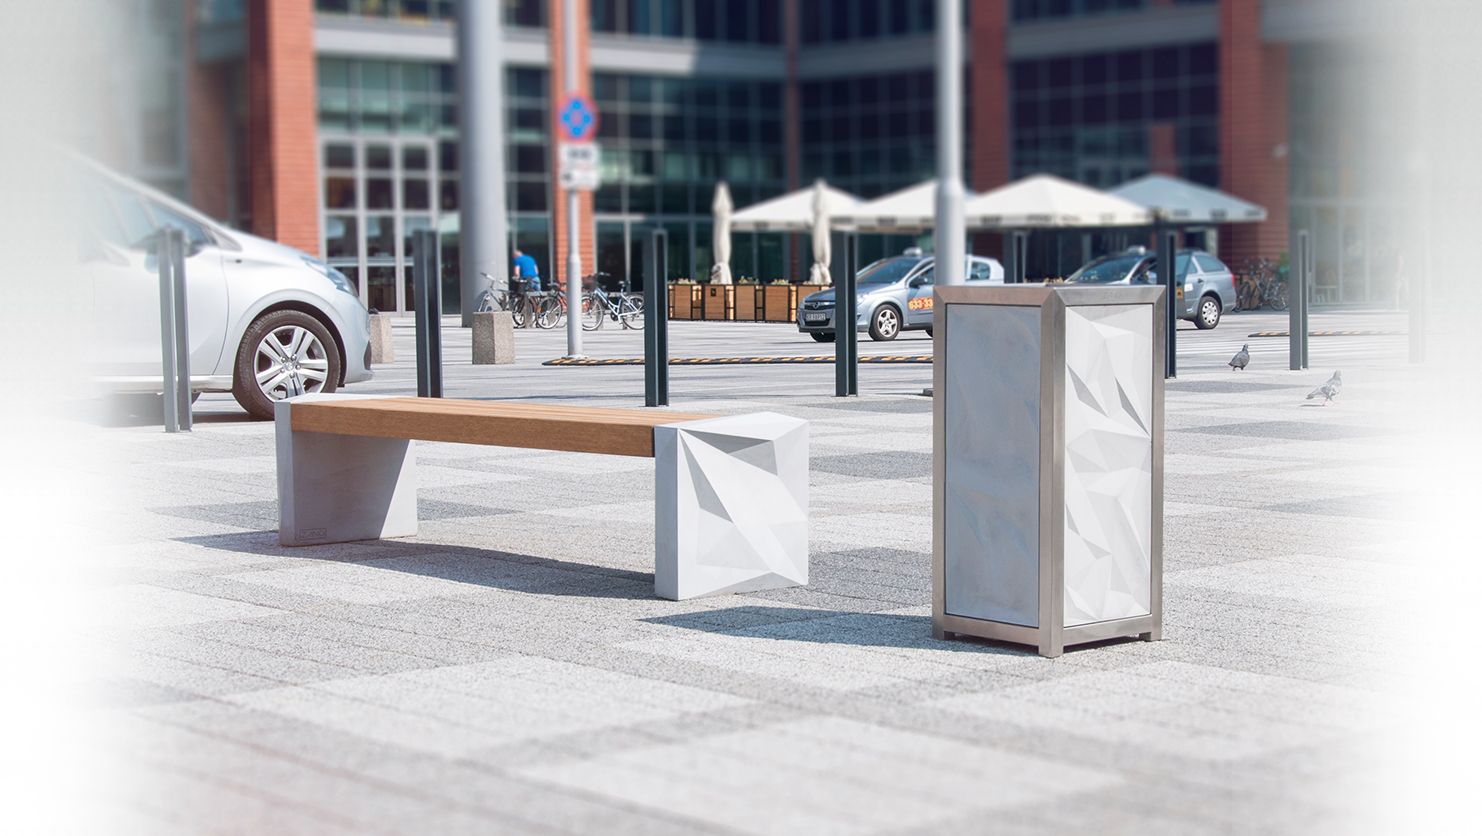 Concrete benches and litter bins from the Trigono series